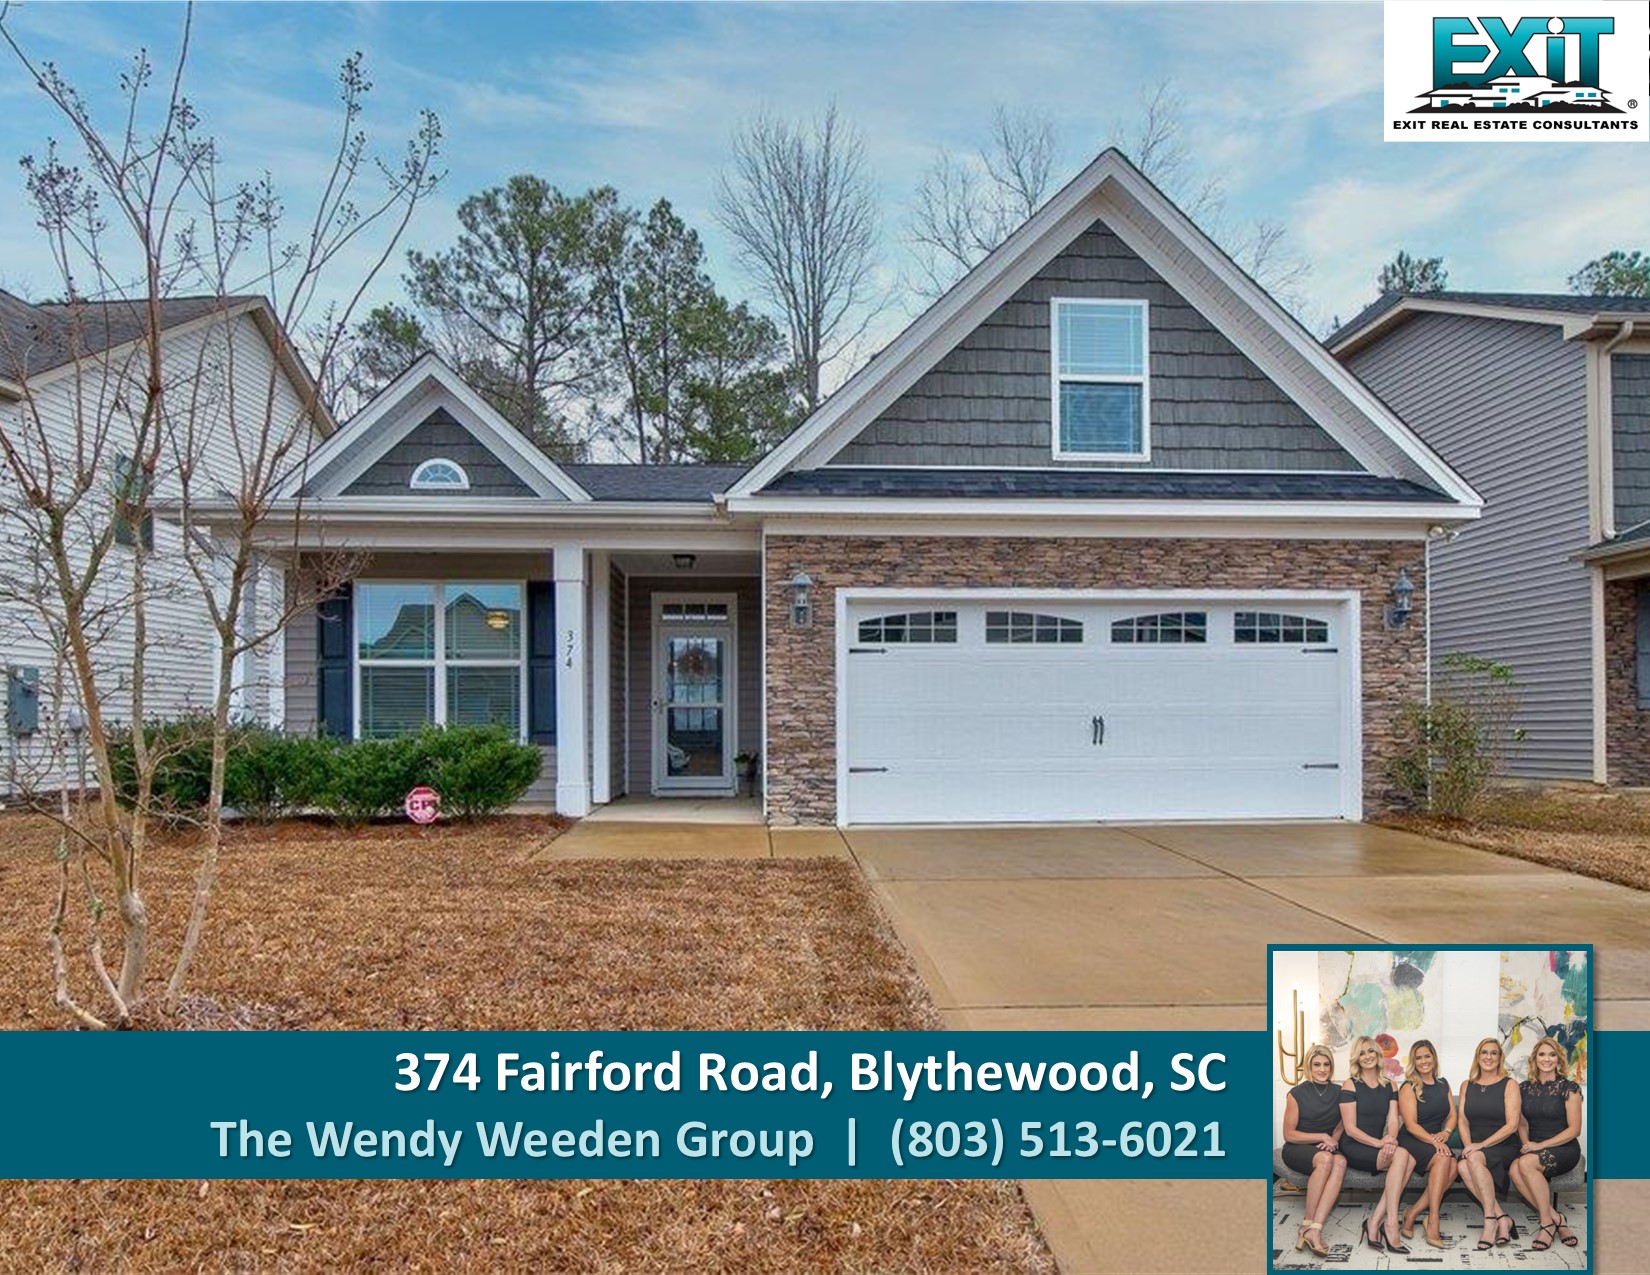 Just listed in Blythewood Crossing - Blythewood